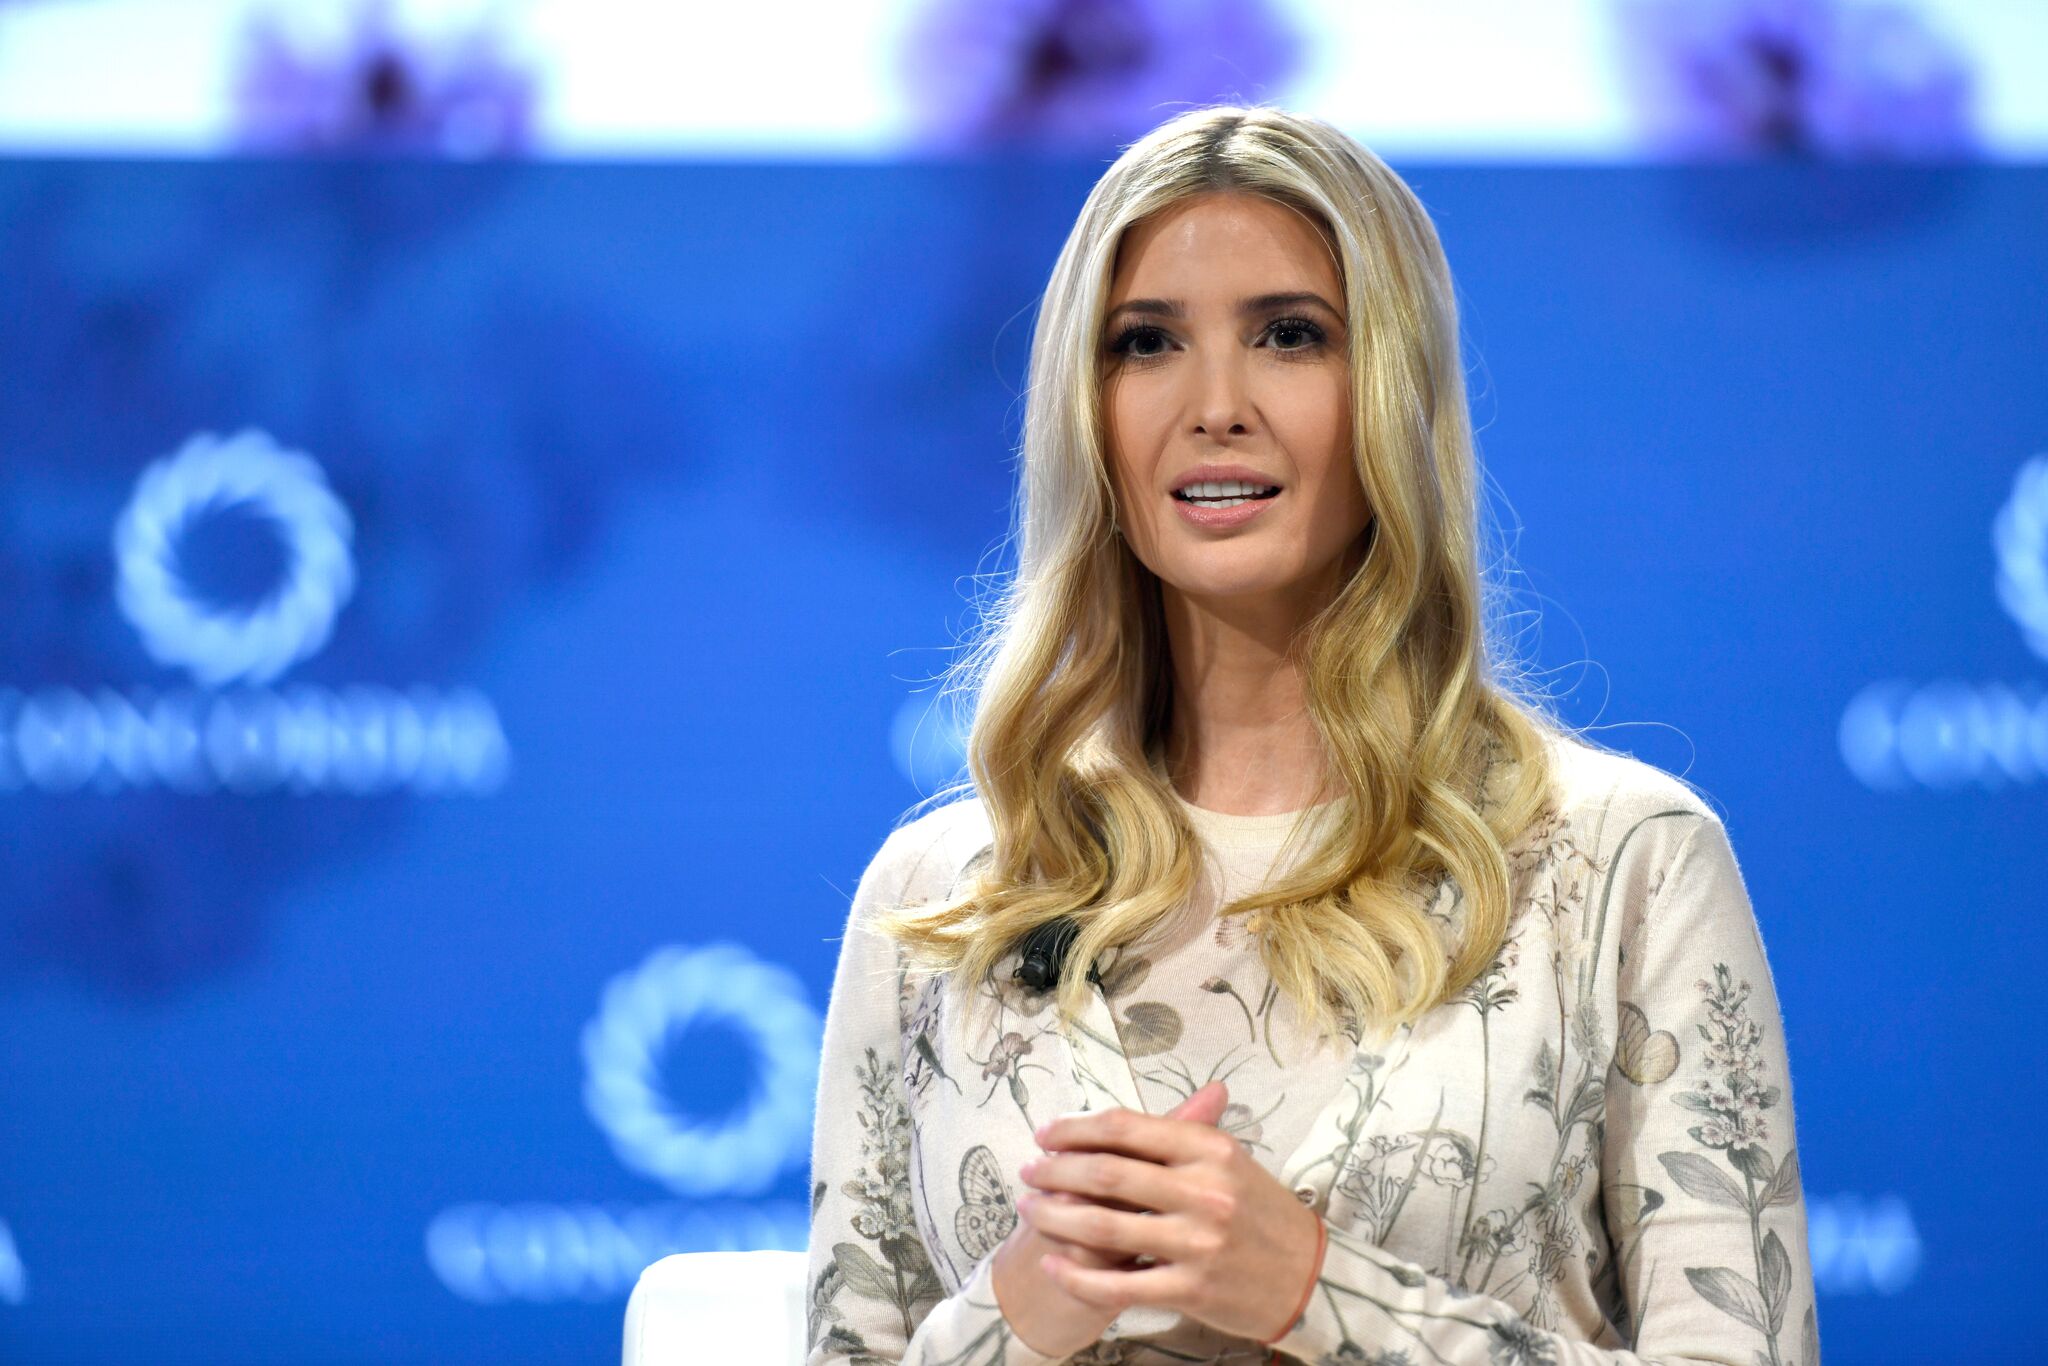 Advisor to the President Ivanka Trump speaks onstage during the 2018 Concordia Annual Summit - Day 1 at Grand Hyatt New York on September 24, 2018 | Photo: Getty Images